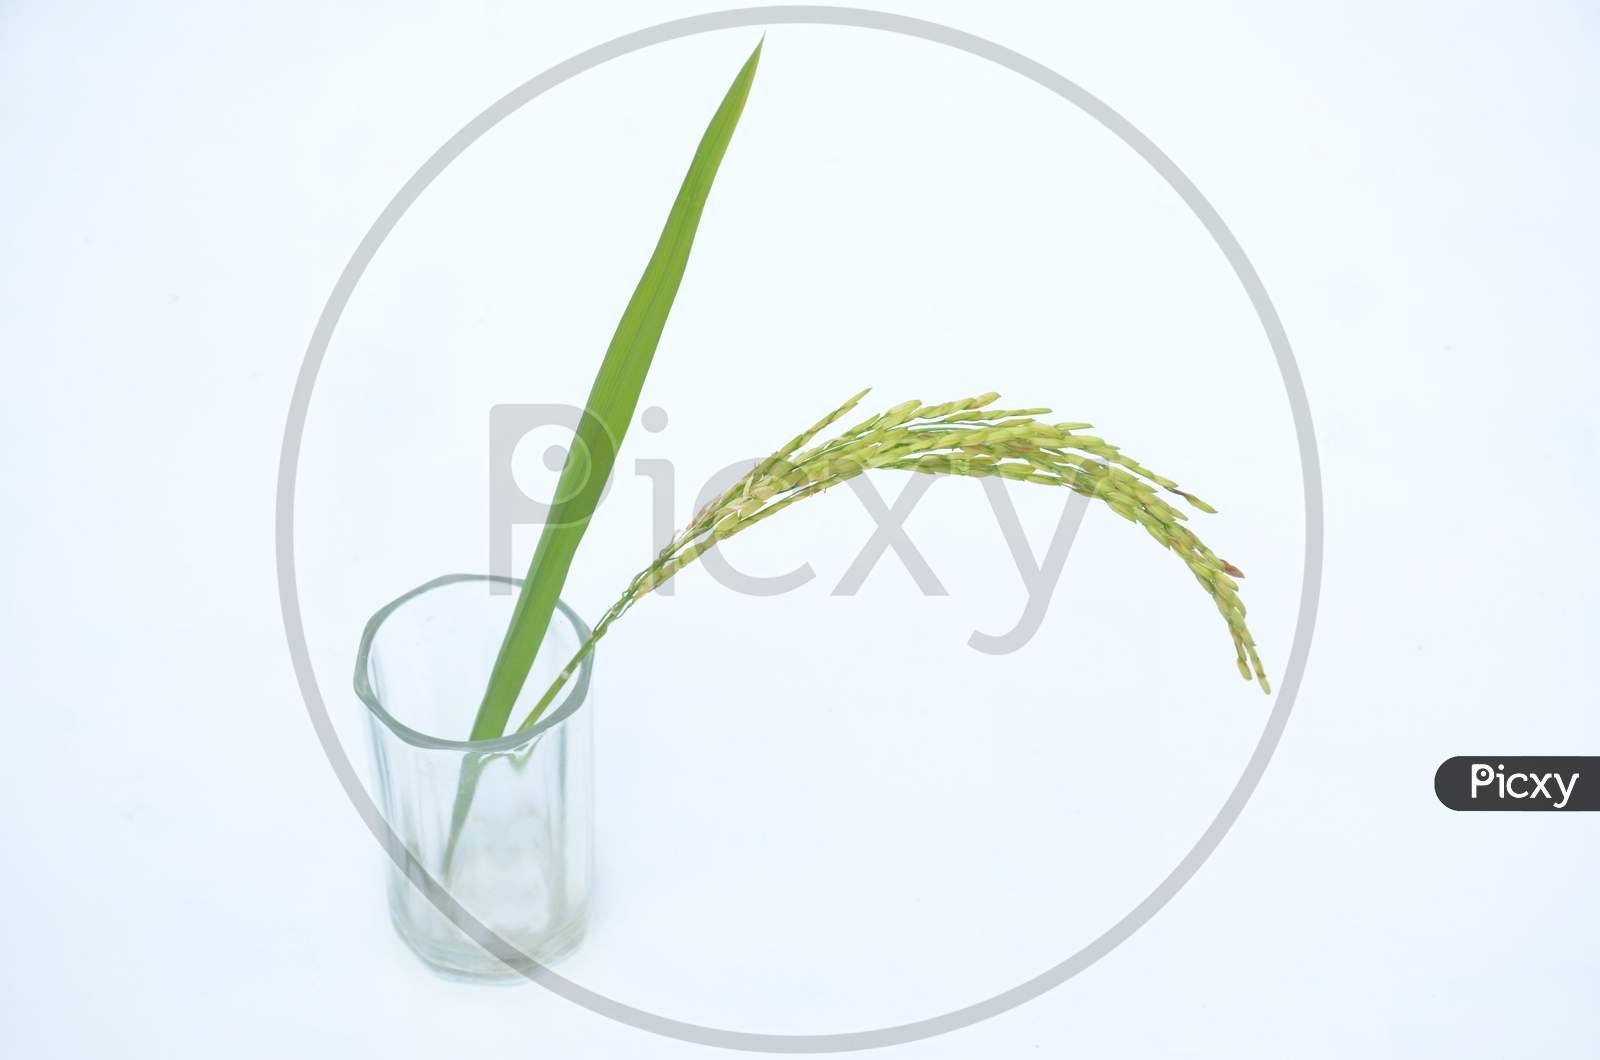 The Green Ripe Paddy Plant Grains In The Glass Isolated On White Background.